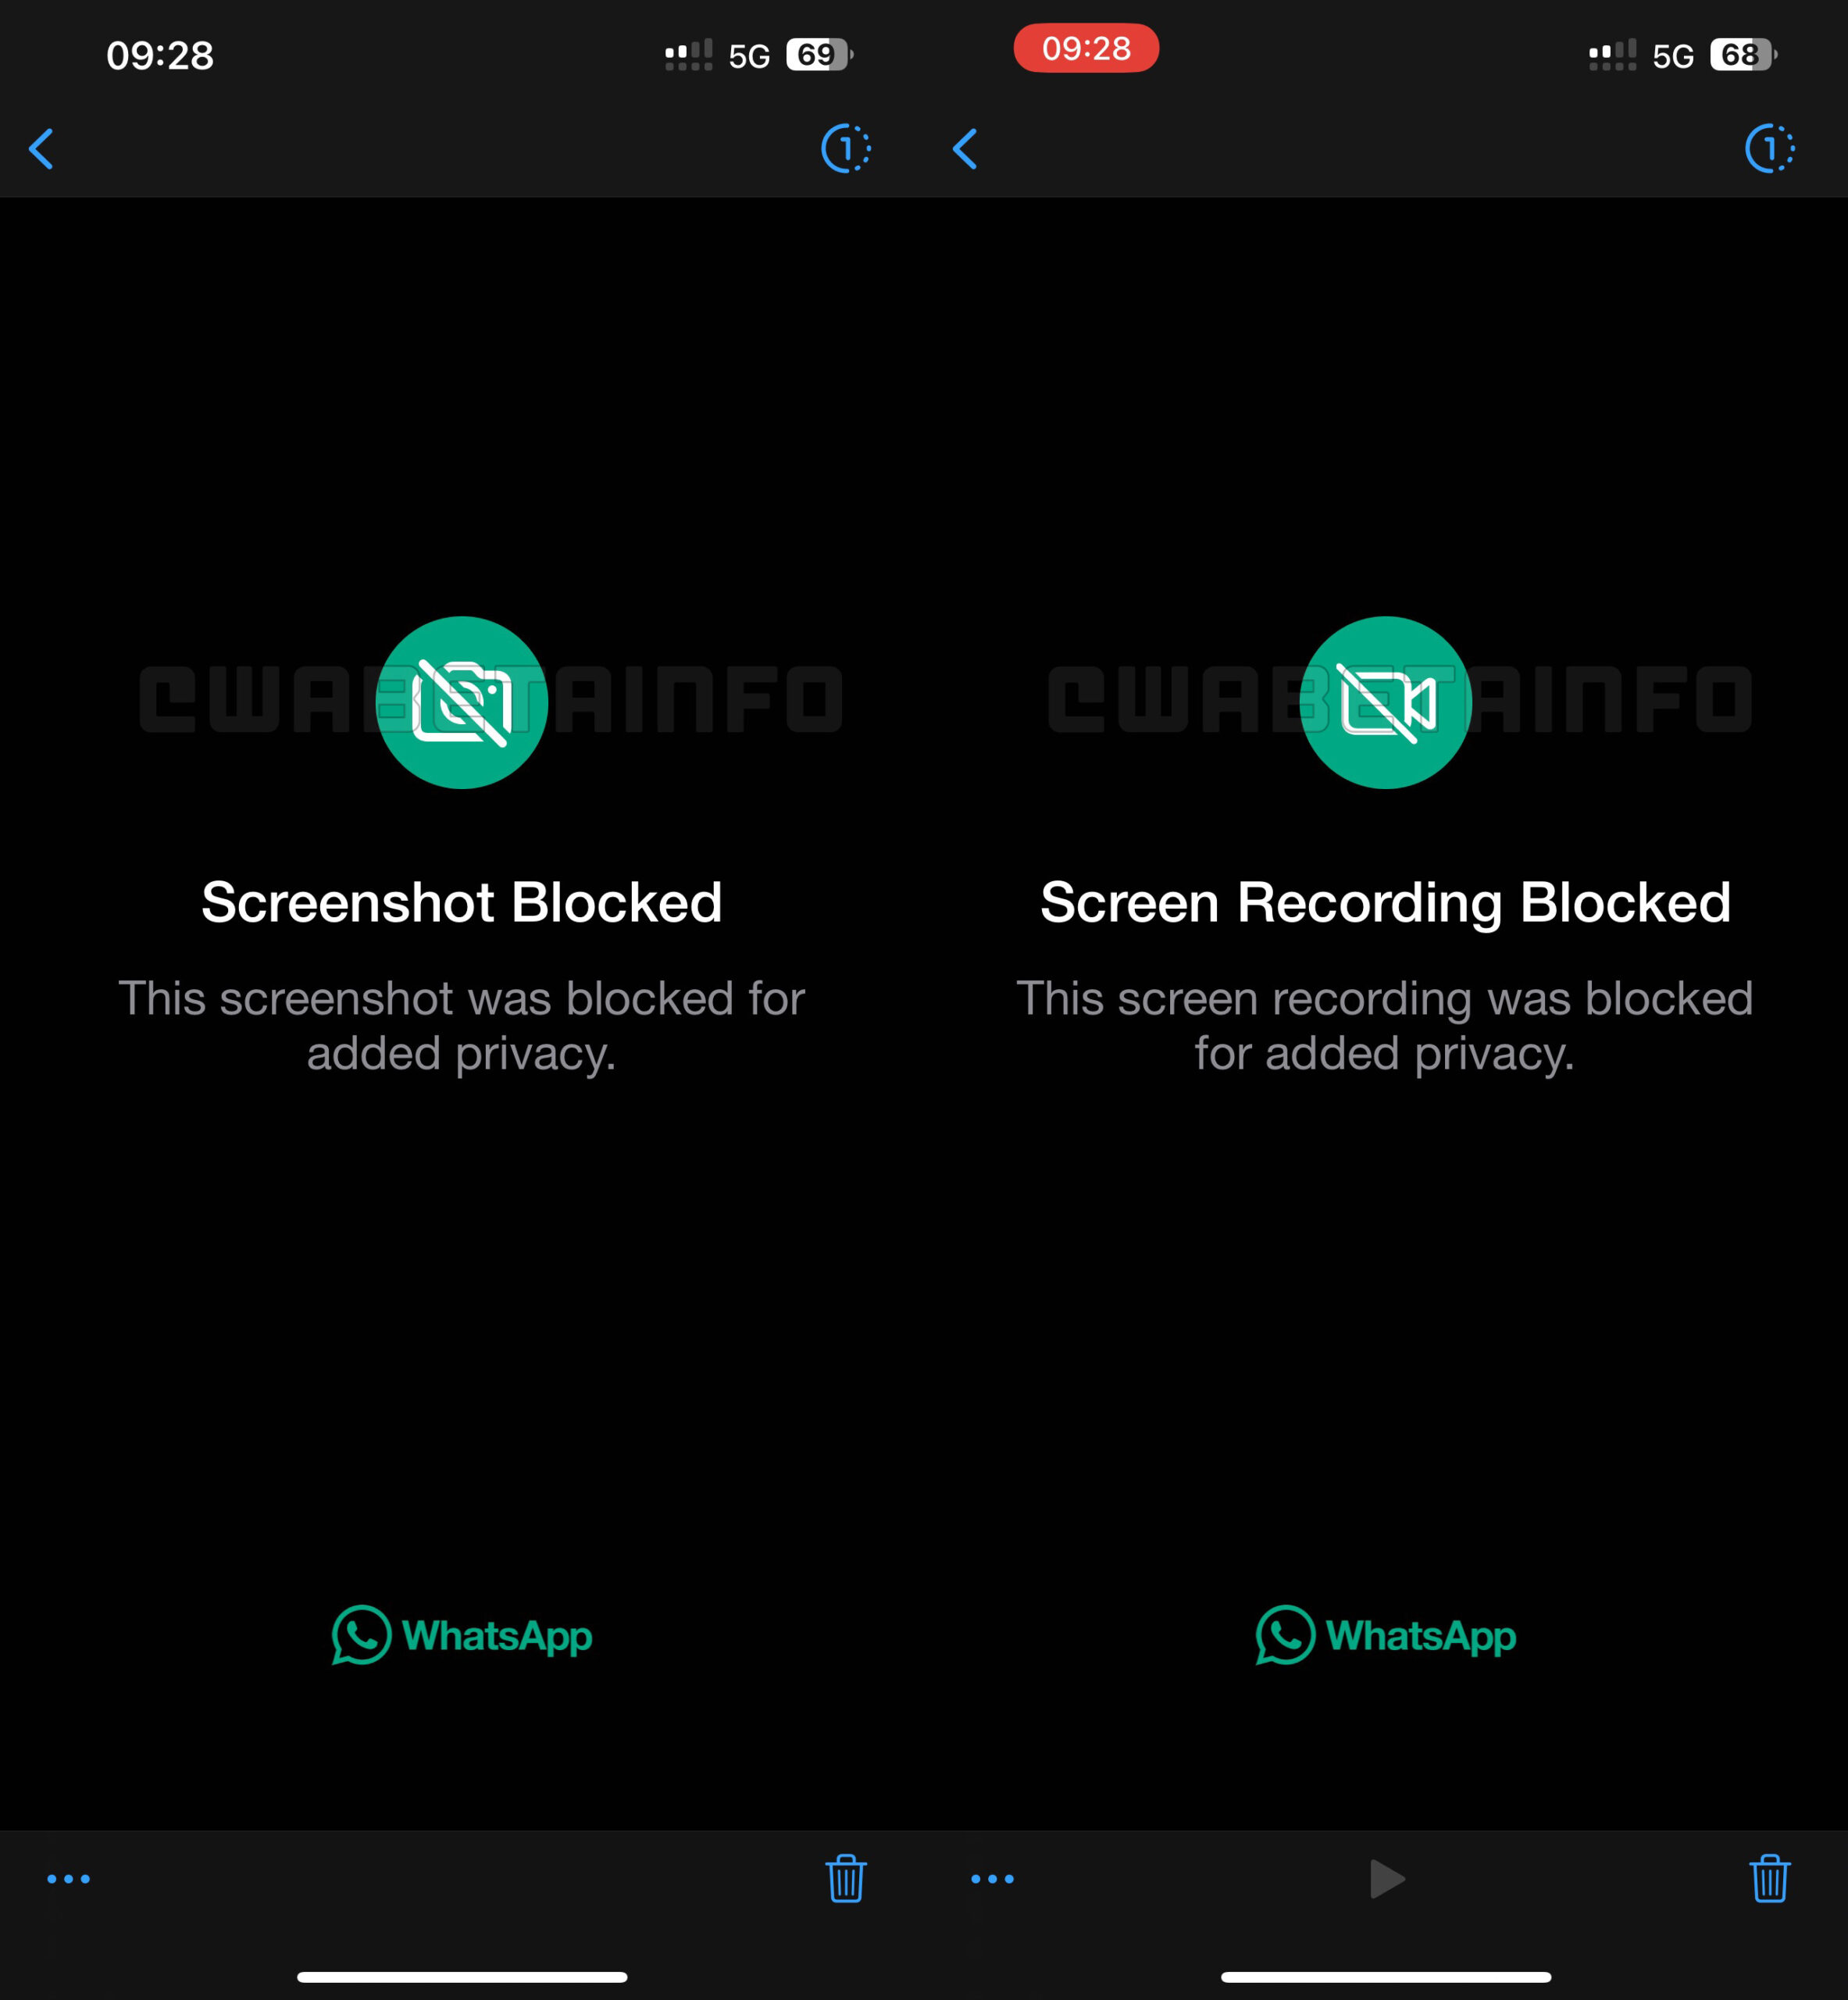 WA SCREENSHOT VIDEO BLOCKED VIEW ONCE IOS scaled 1